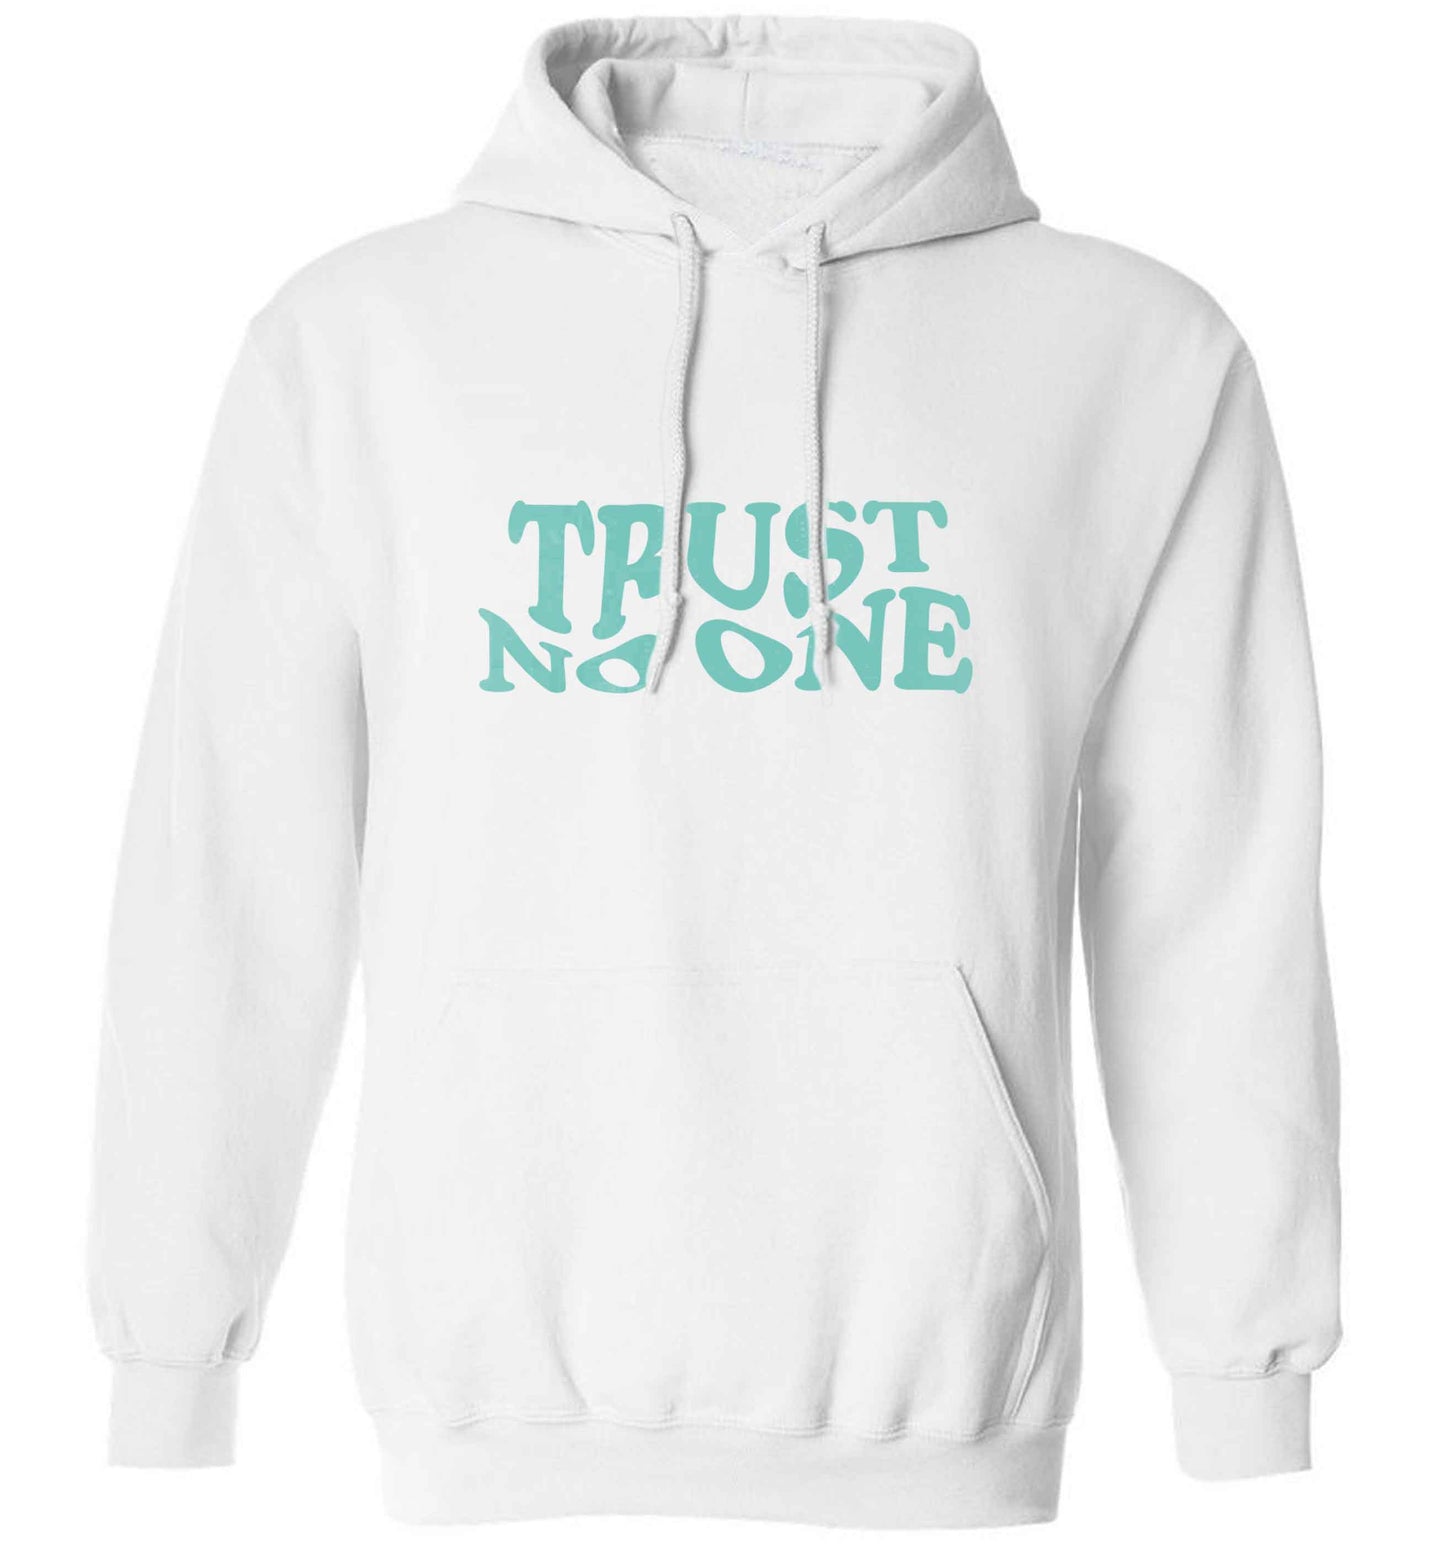 Trust no one adults unisex white hoodie 2XL